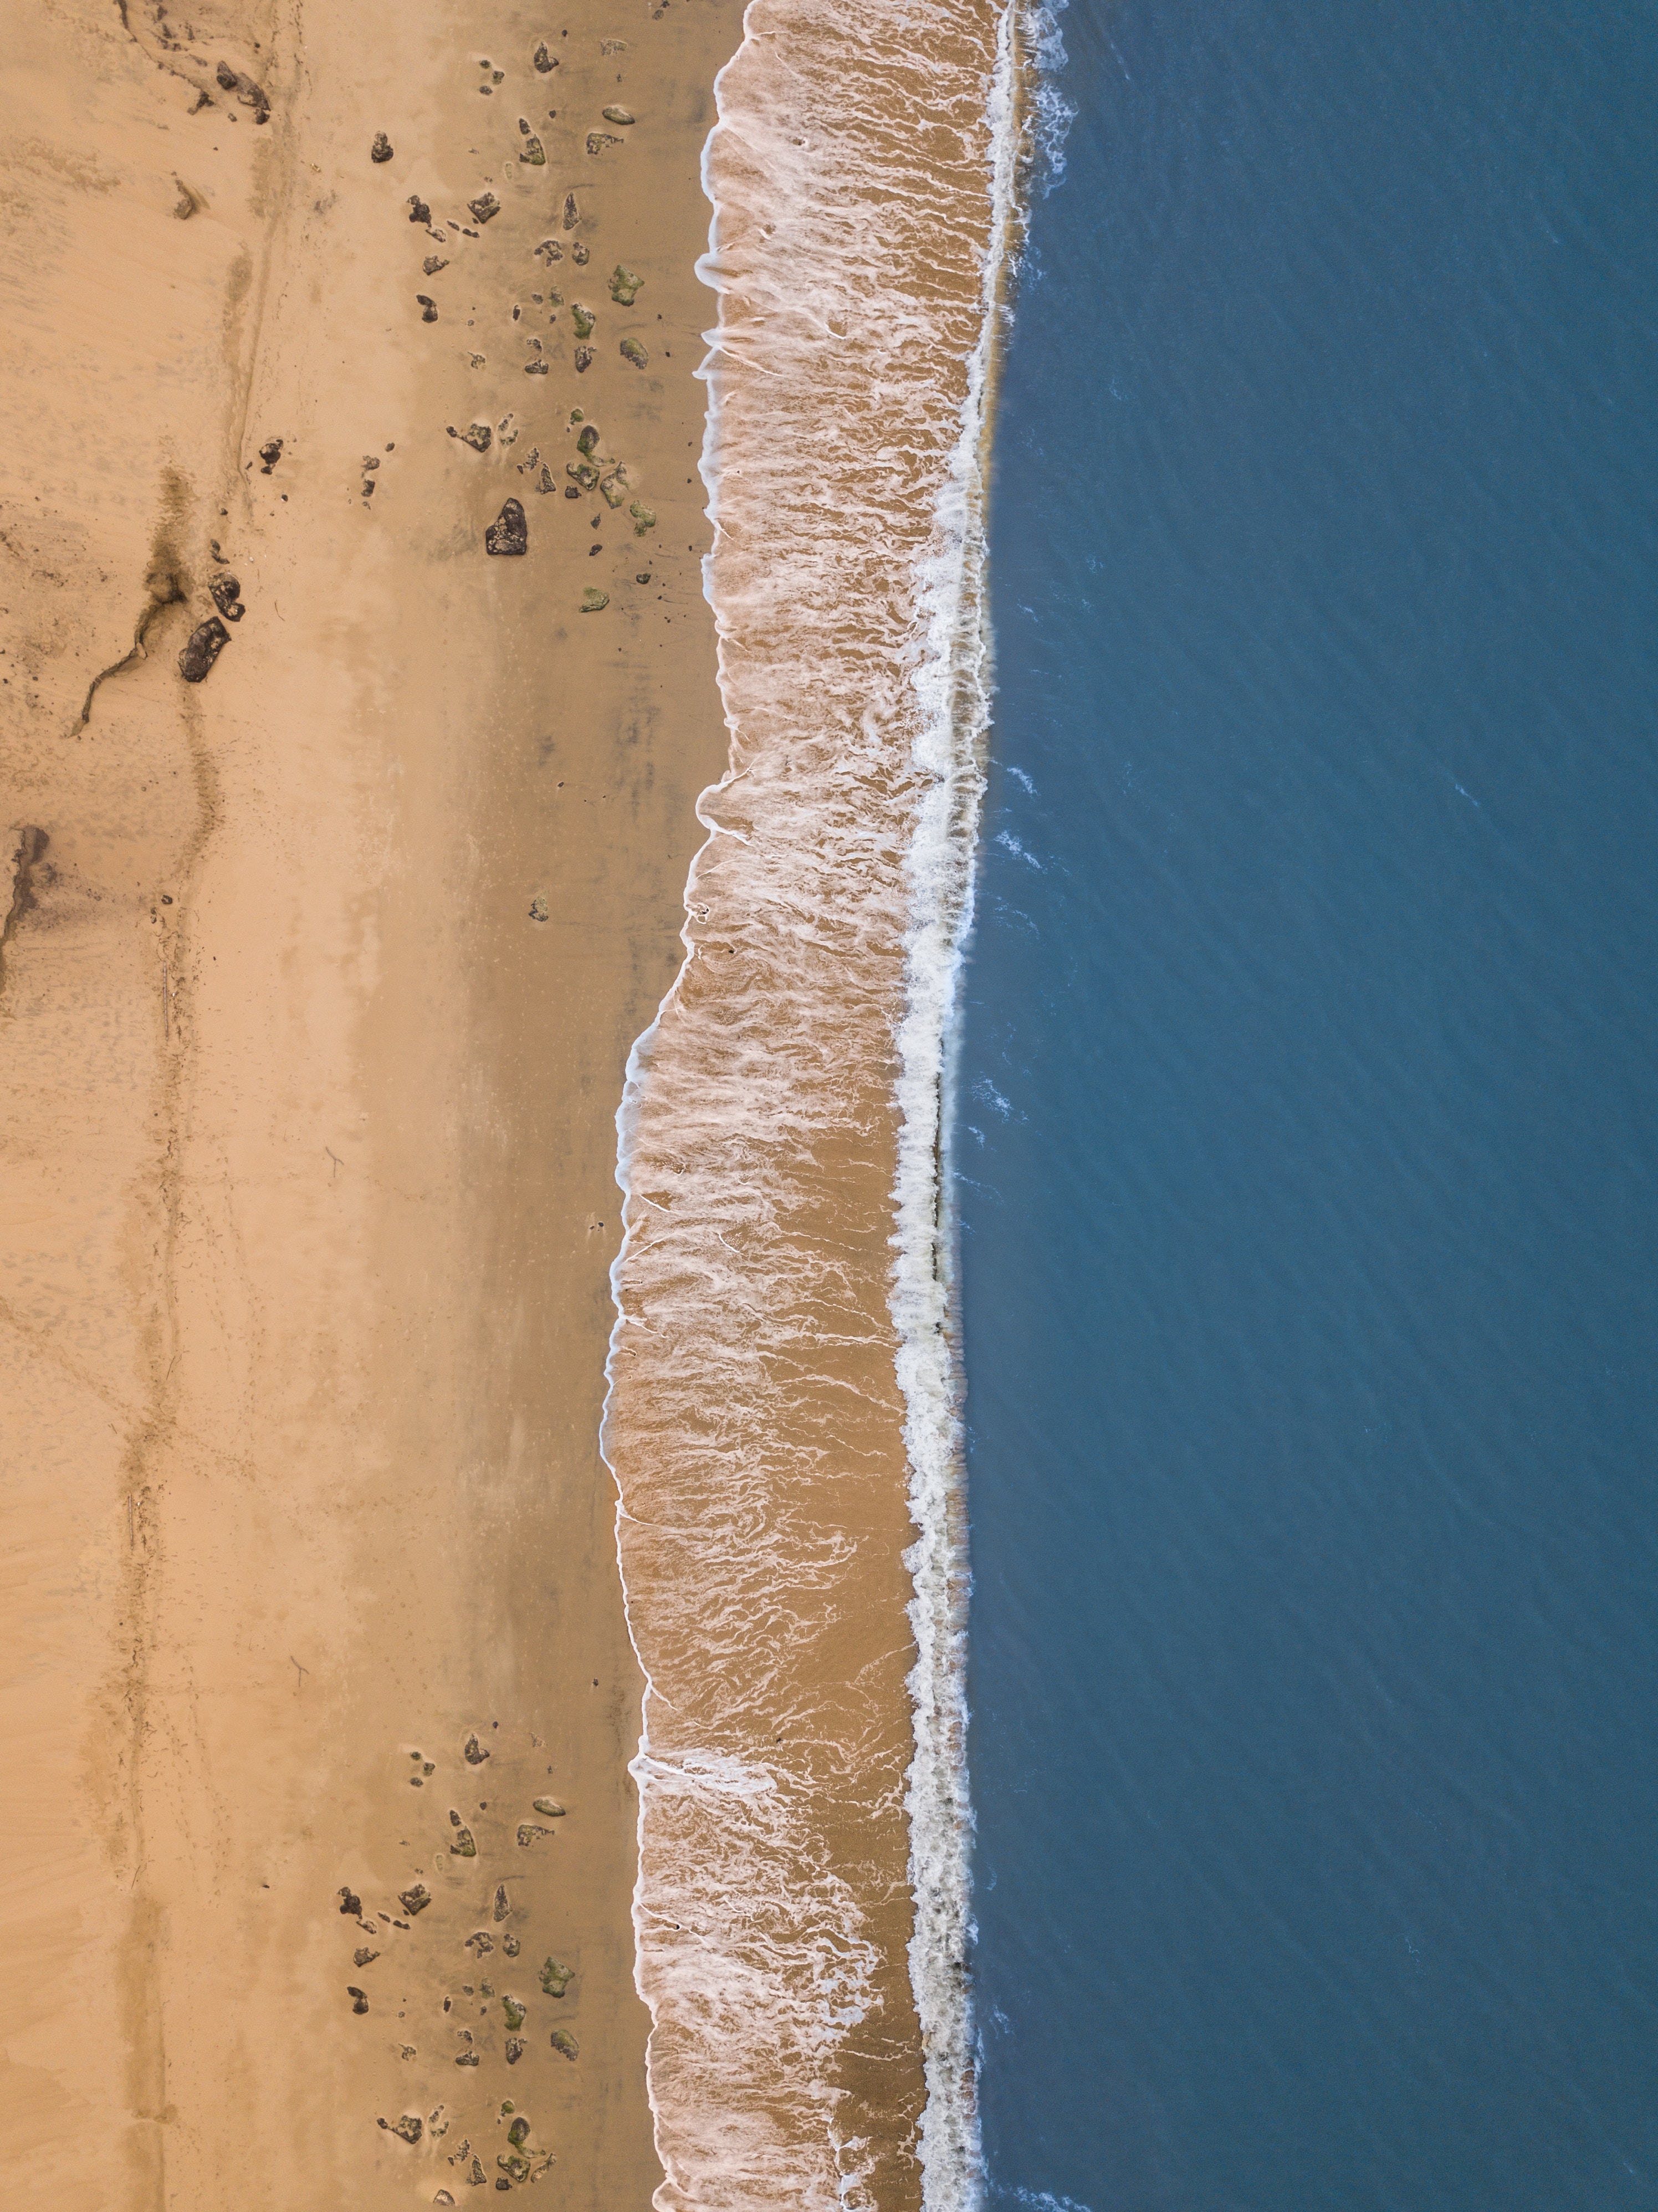 nature, sea, beach, sand, view from above, surf, wave Full HD